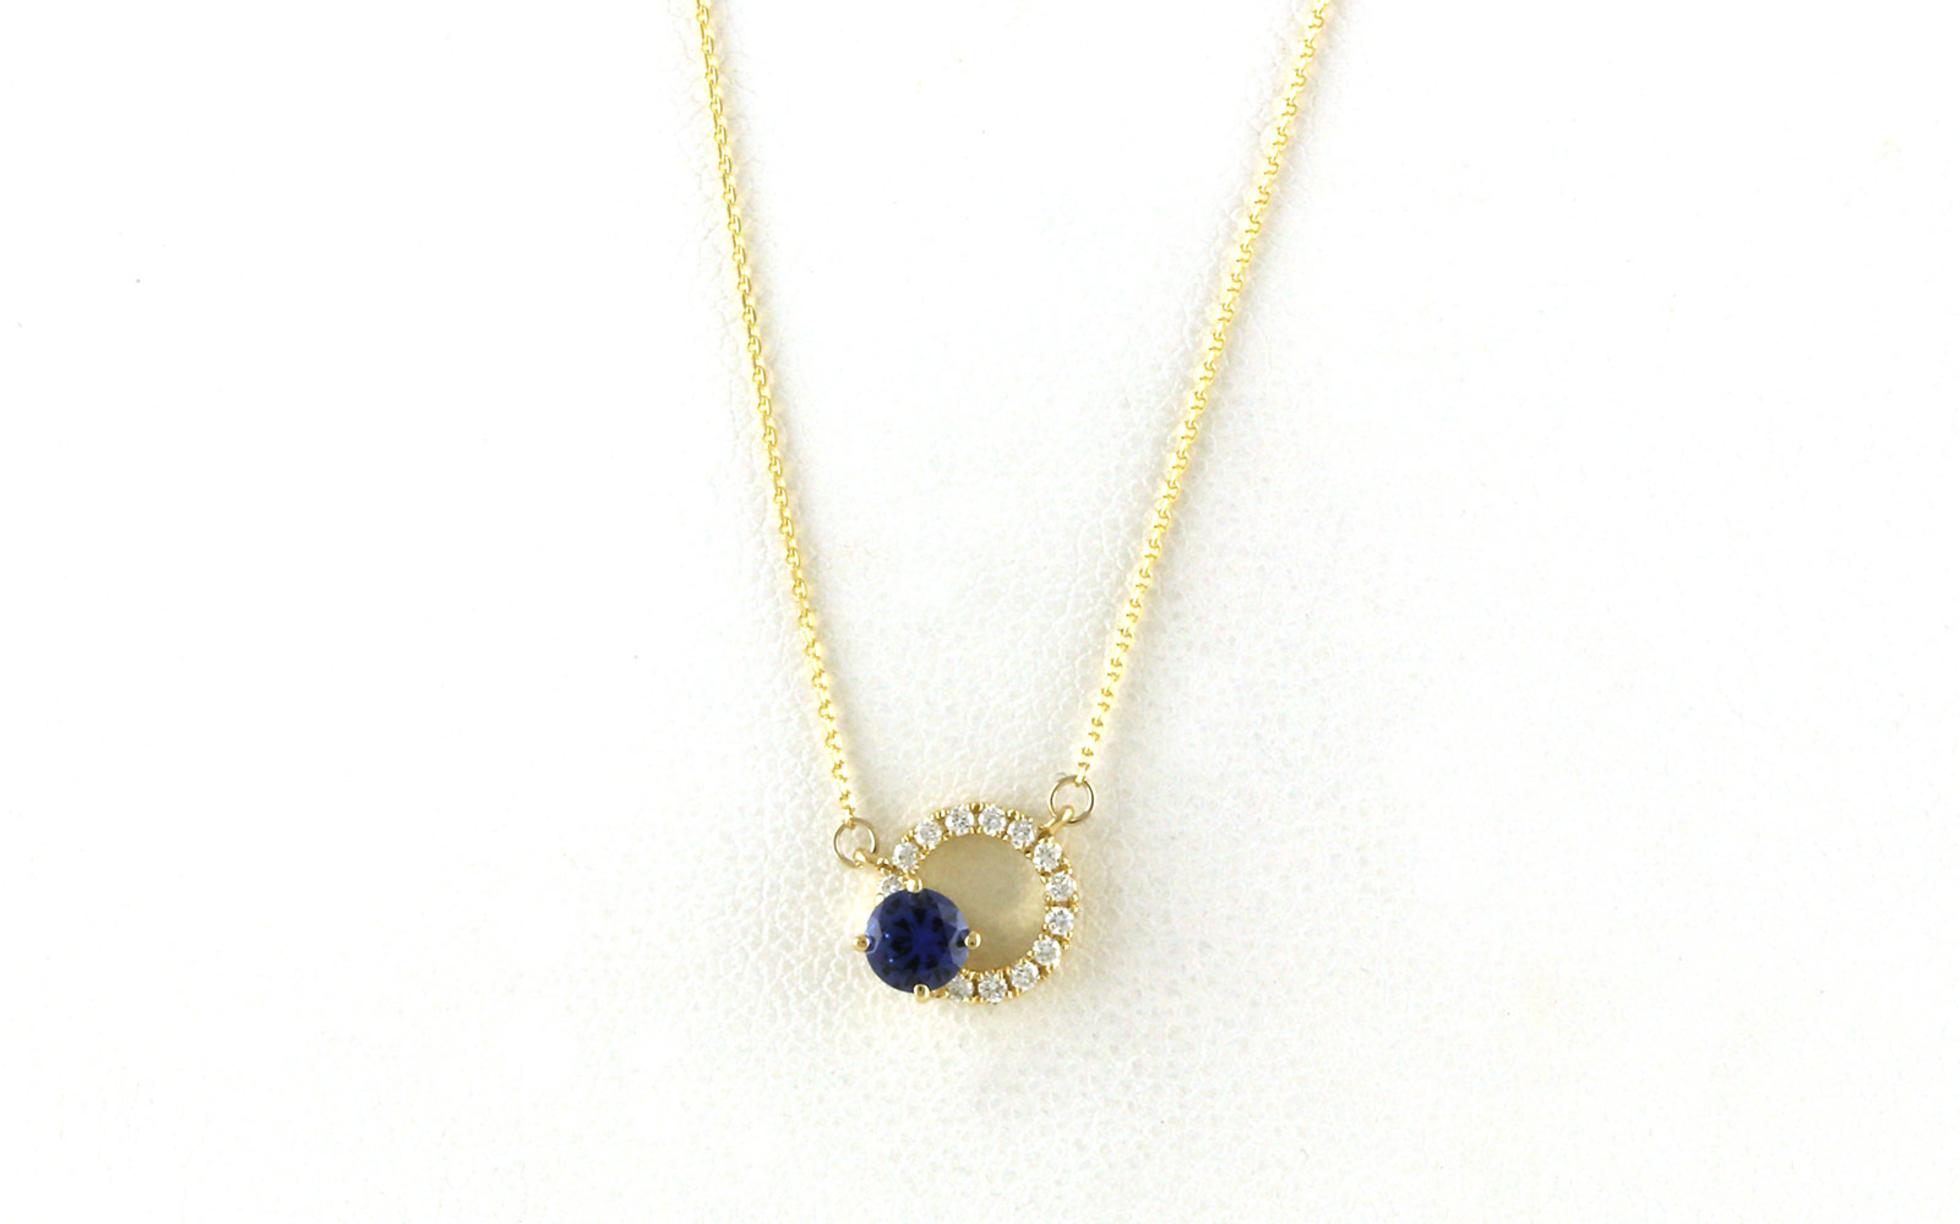 Circles-style Montana Yogo Sapphire Necklace in Yellow Gold (0.34cts TWT)